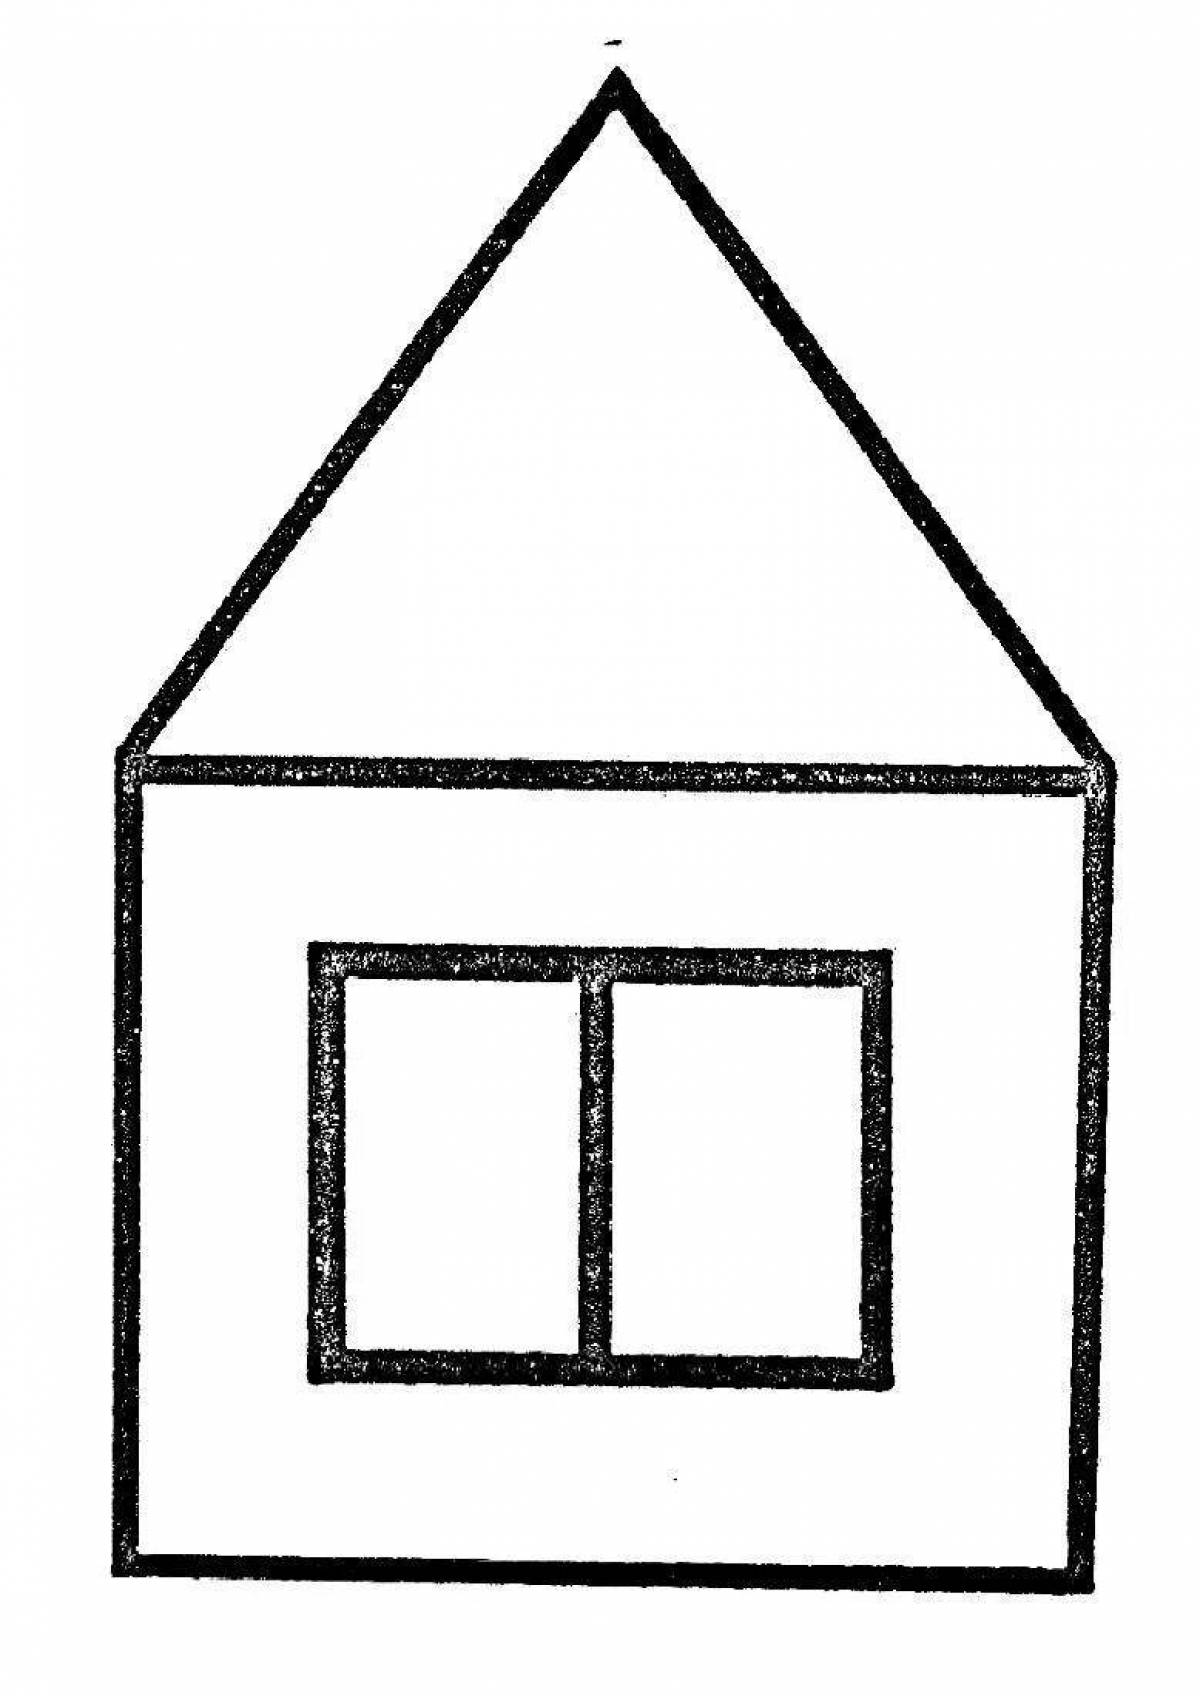 Adorable geometric house coloring page